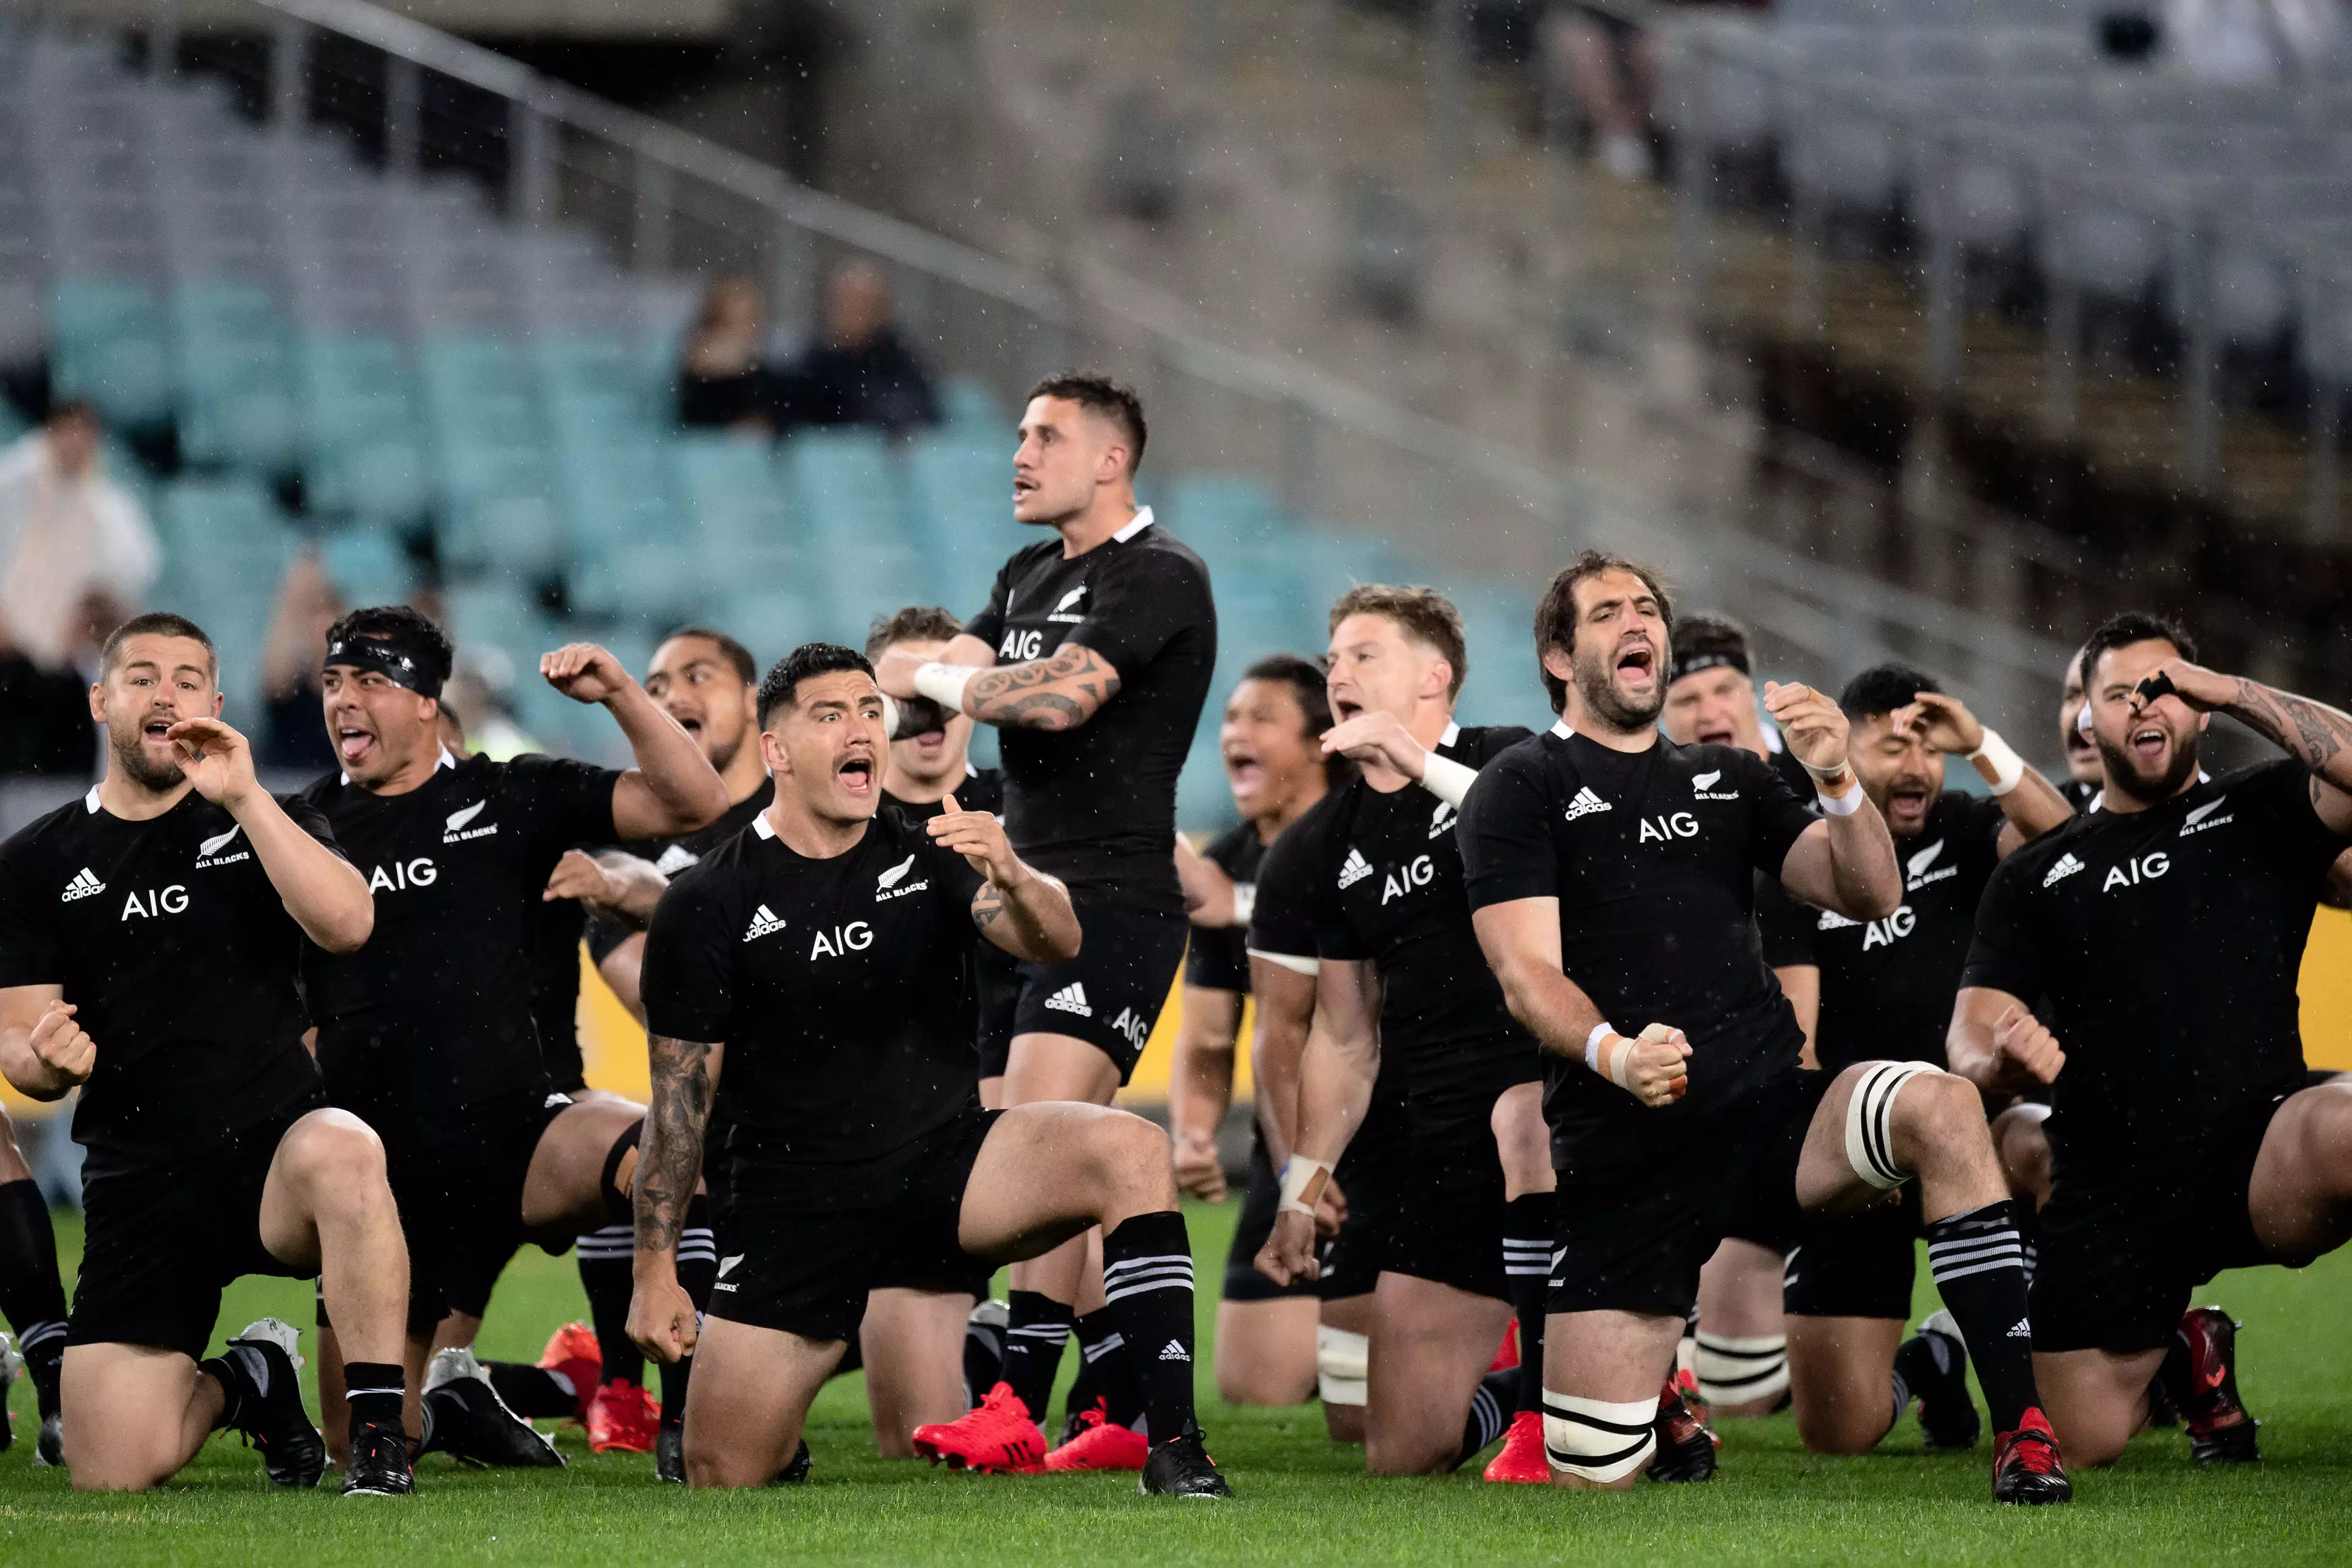 The All Blacks also performed the haka.